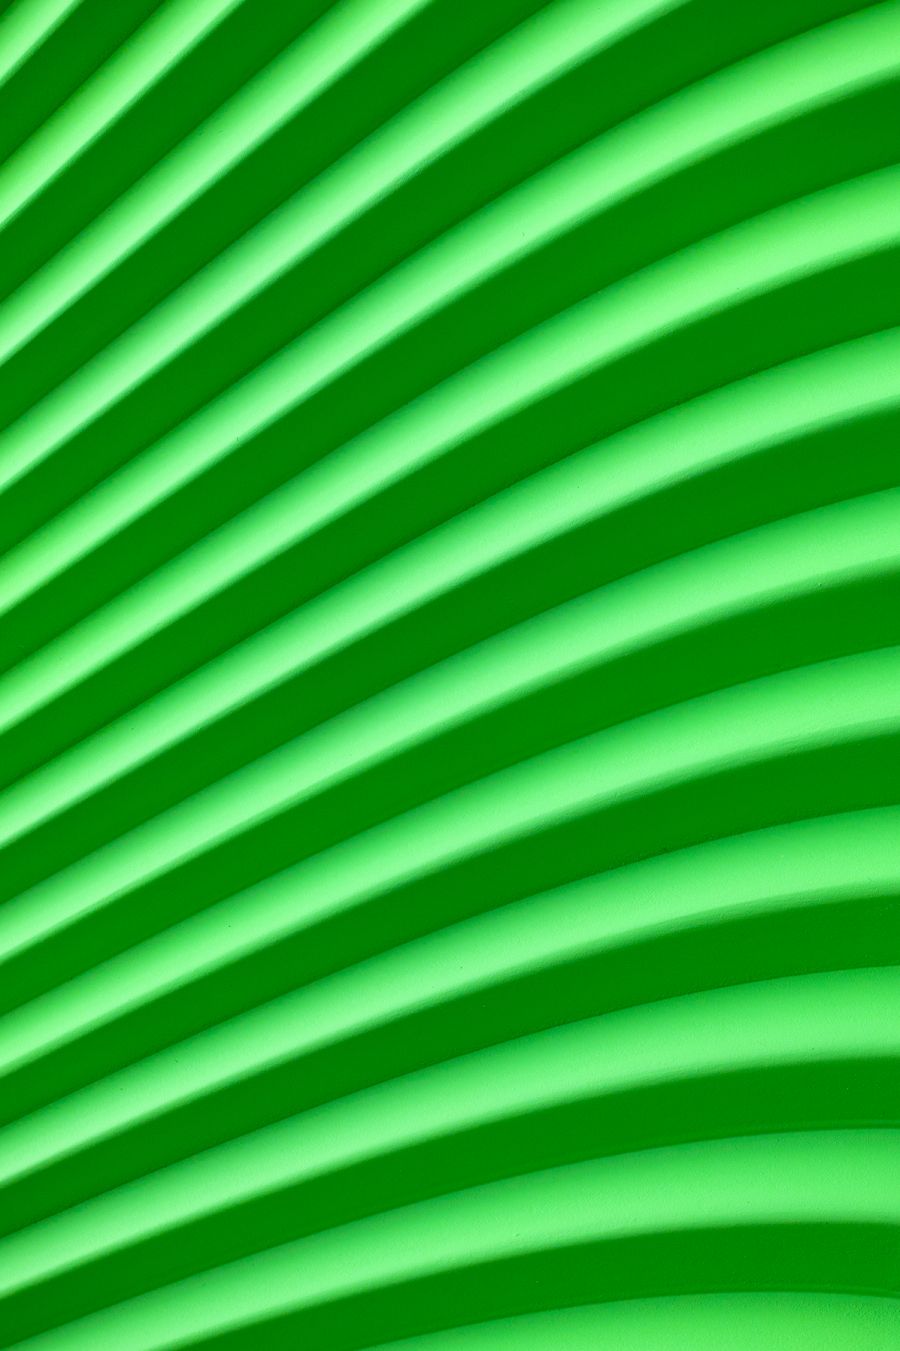 Image of Green waves